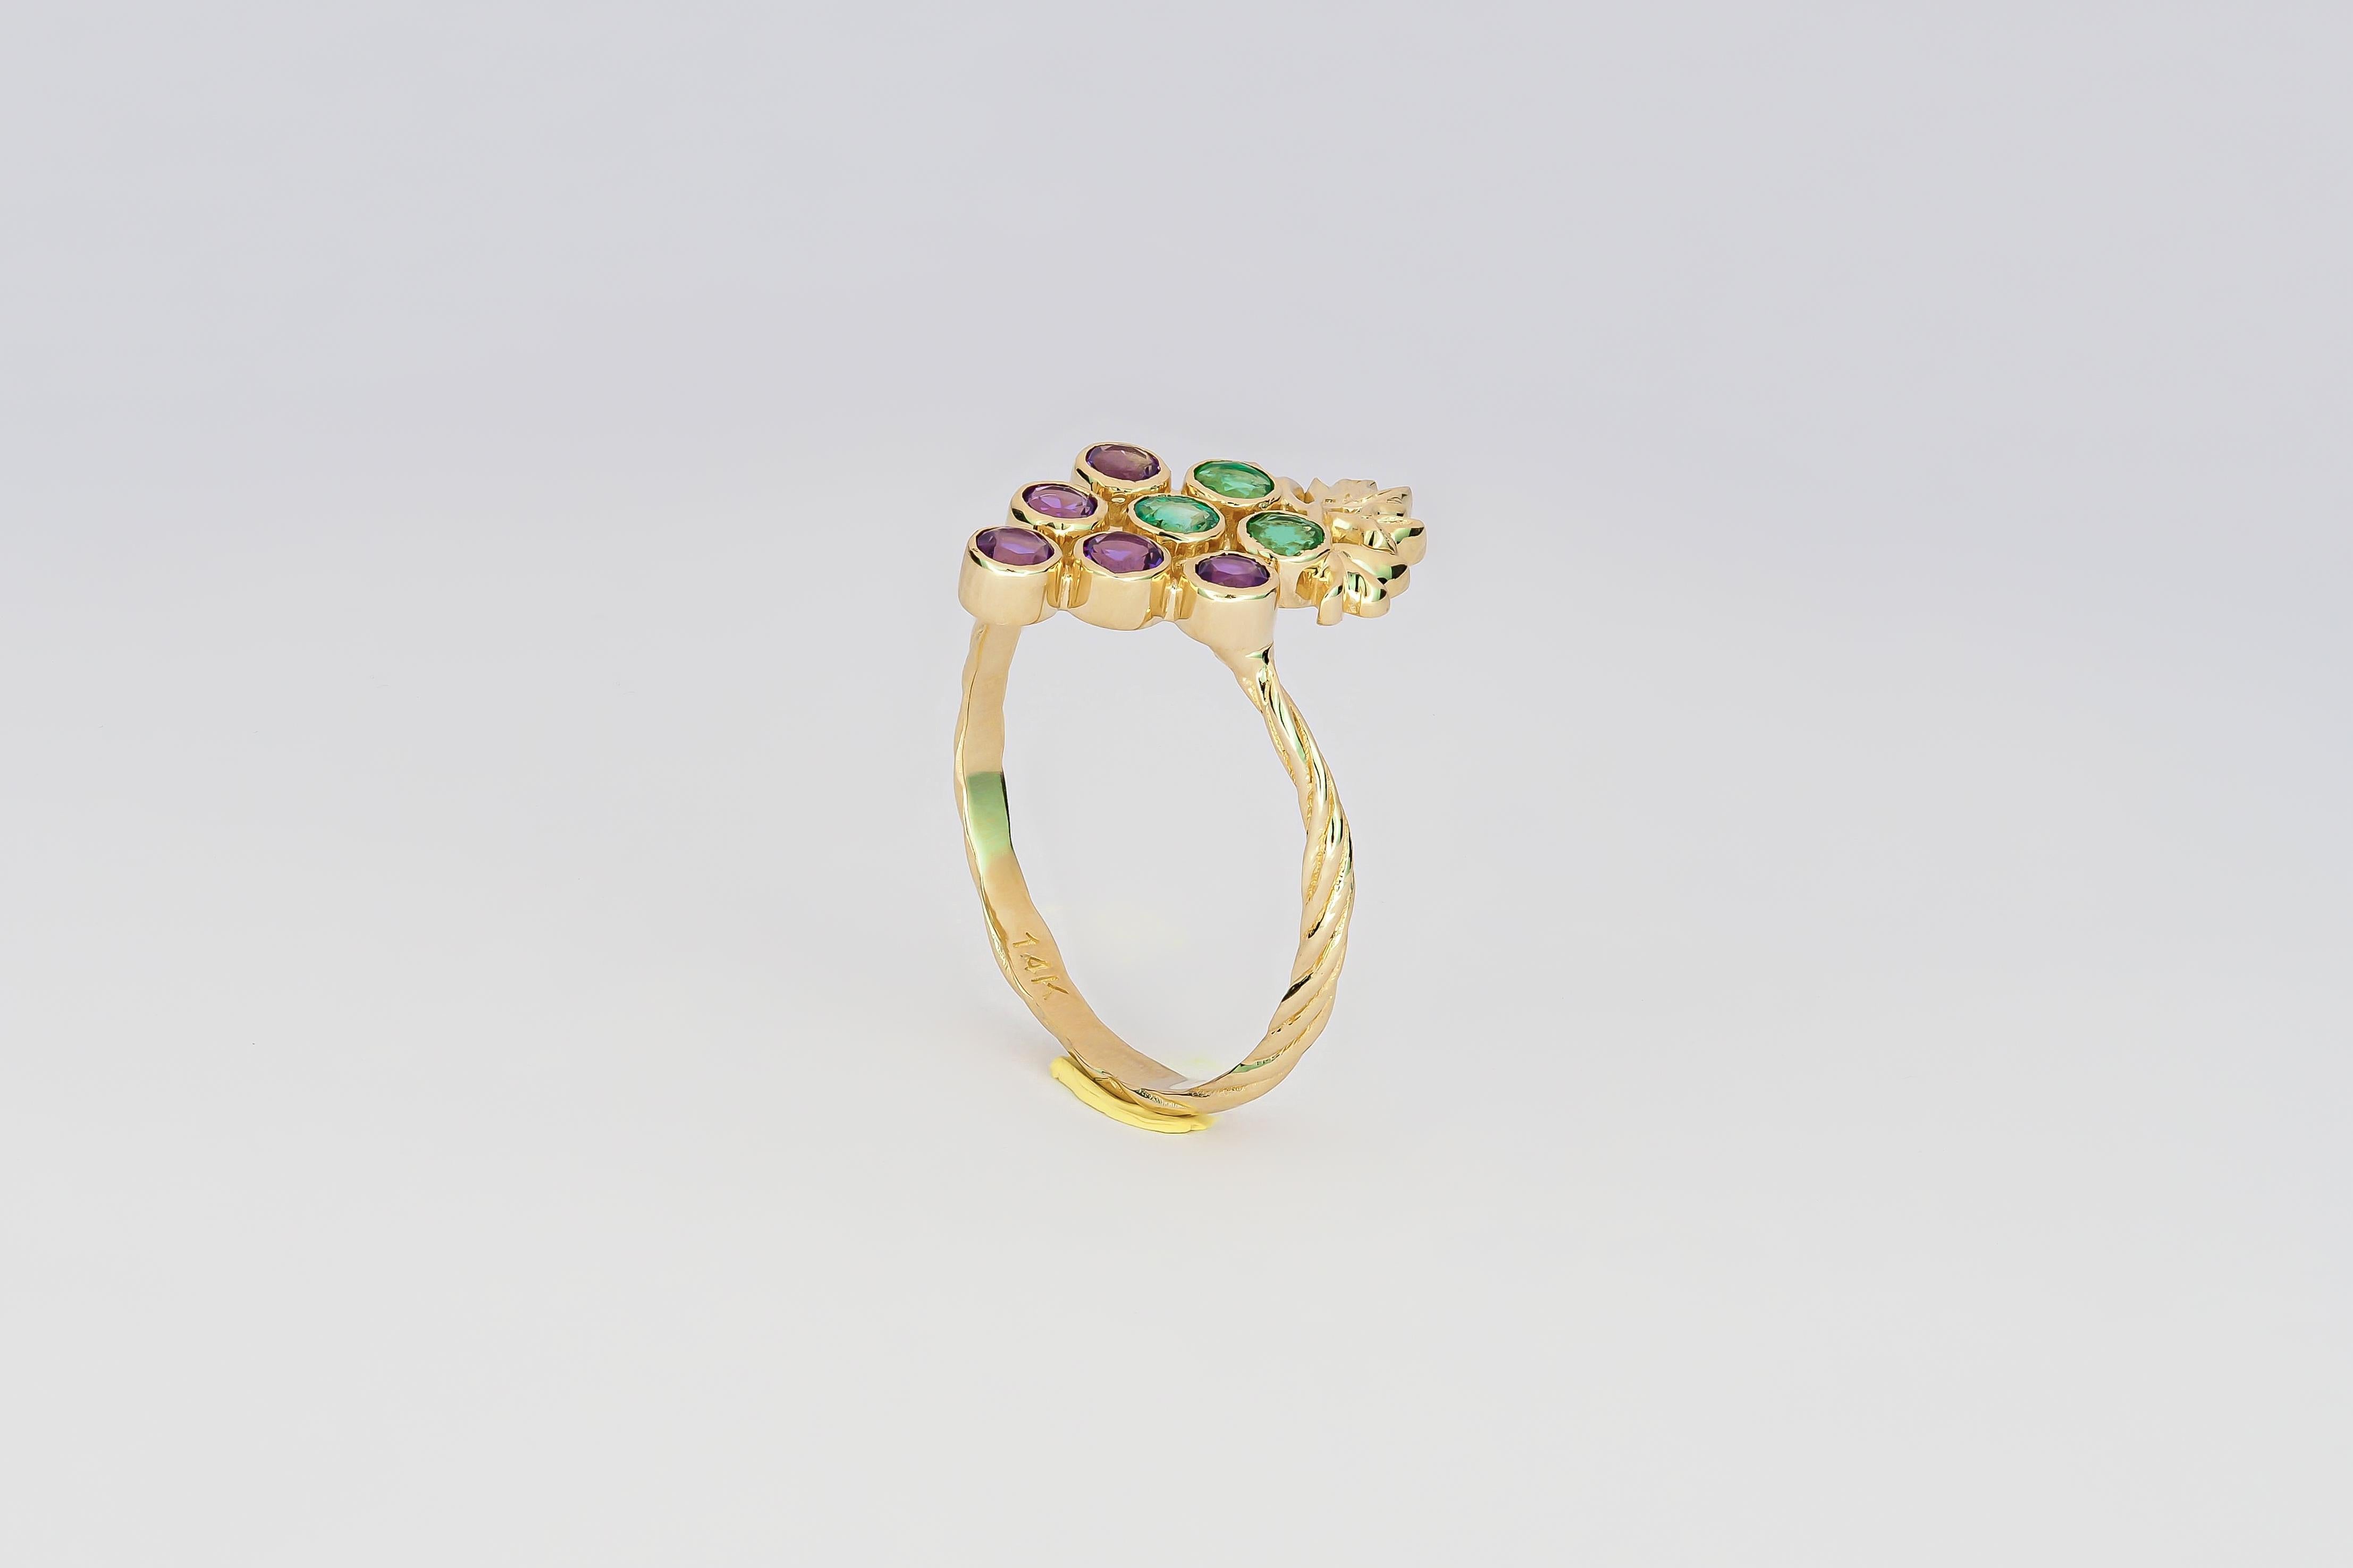 For Sale:  14k Gold Ring with Natural Emeralds and Amethysts. Grape gold ring. 8